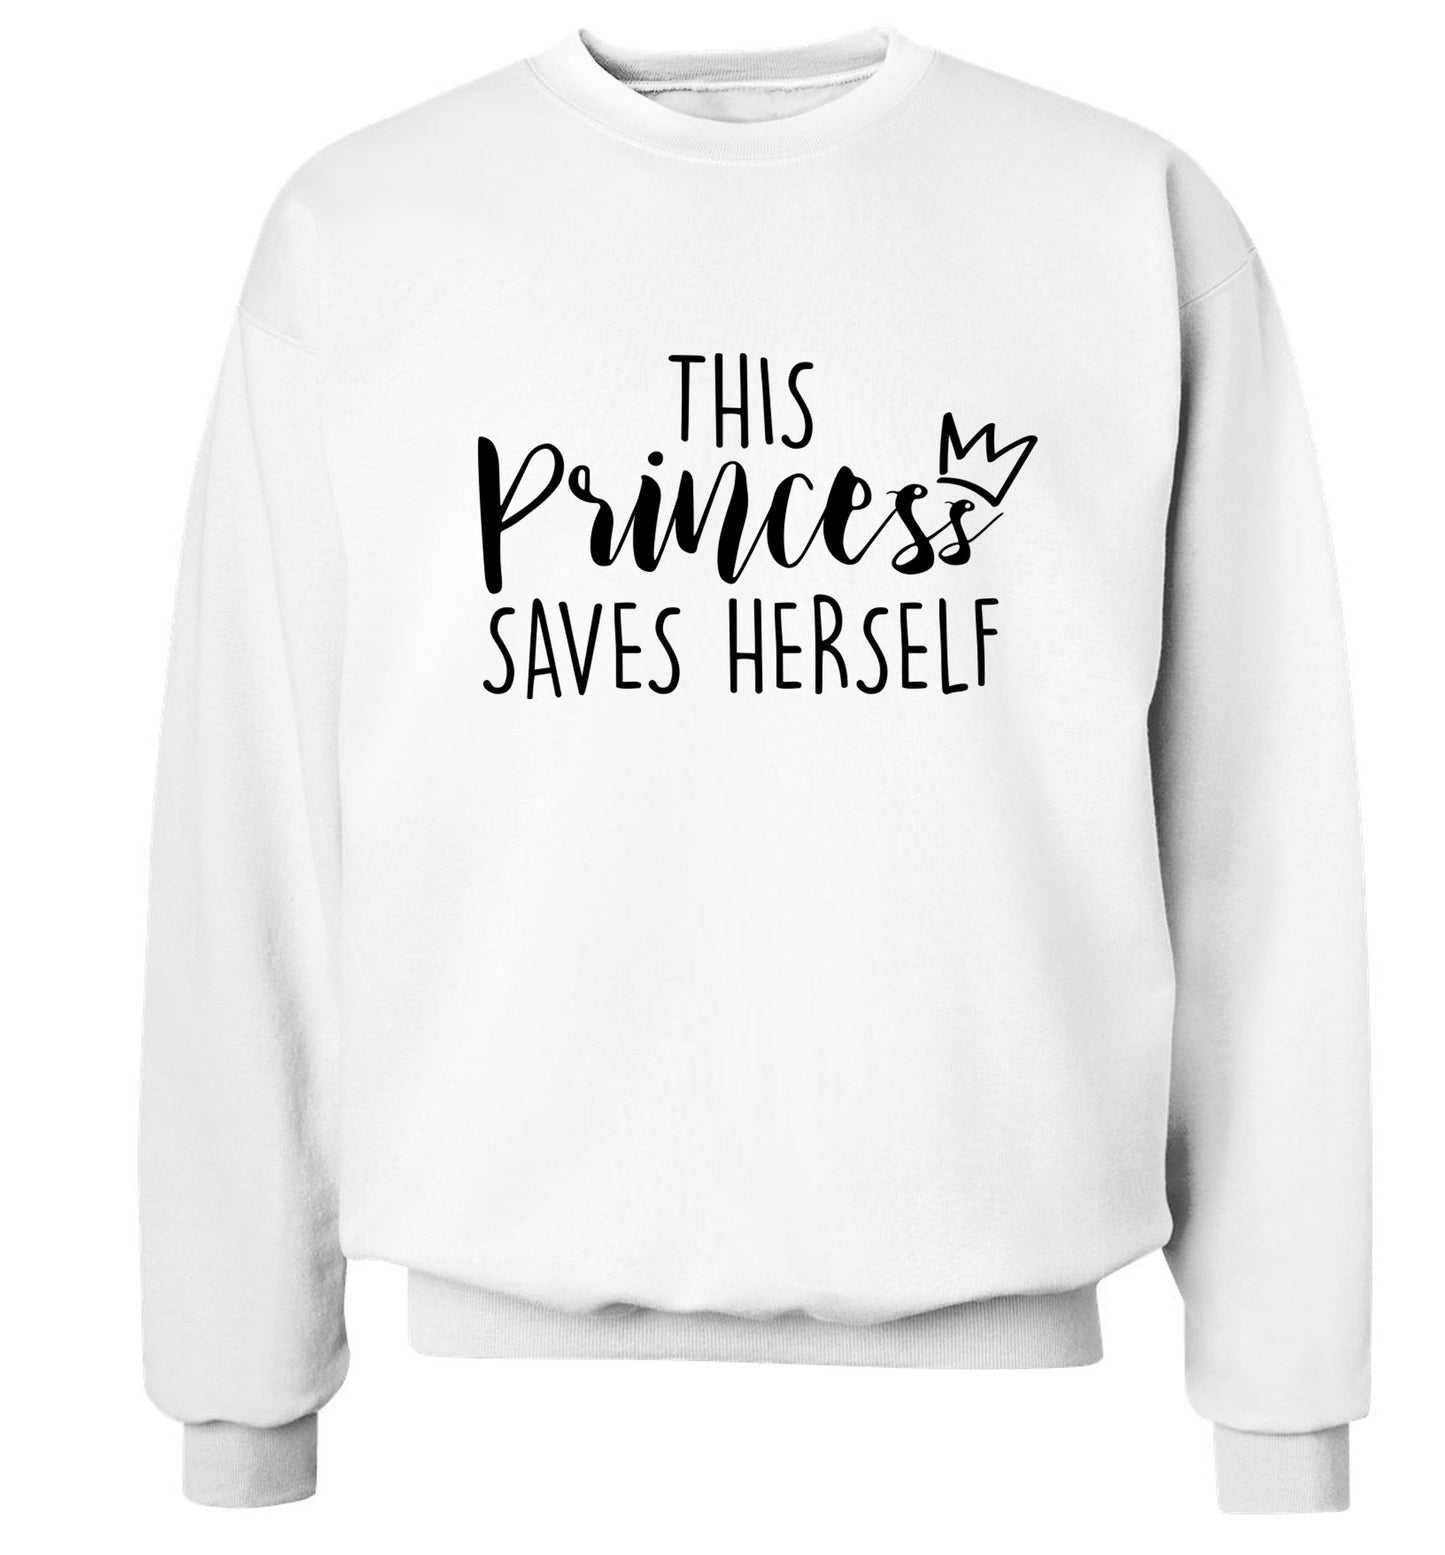 This princess saves herself Adult's unisex white Sweater 2XL